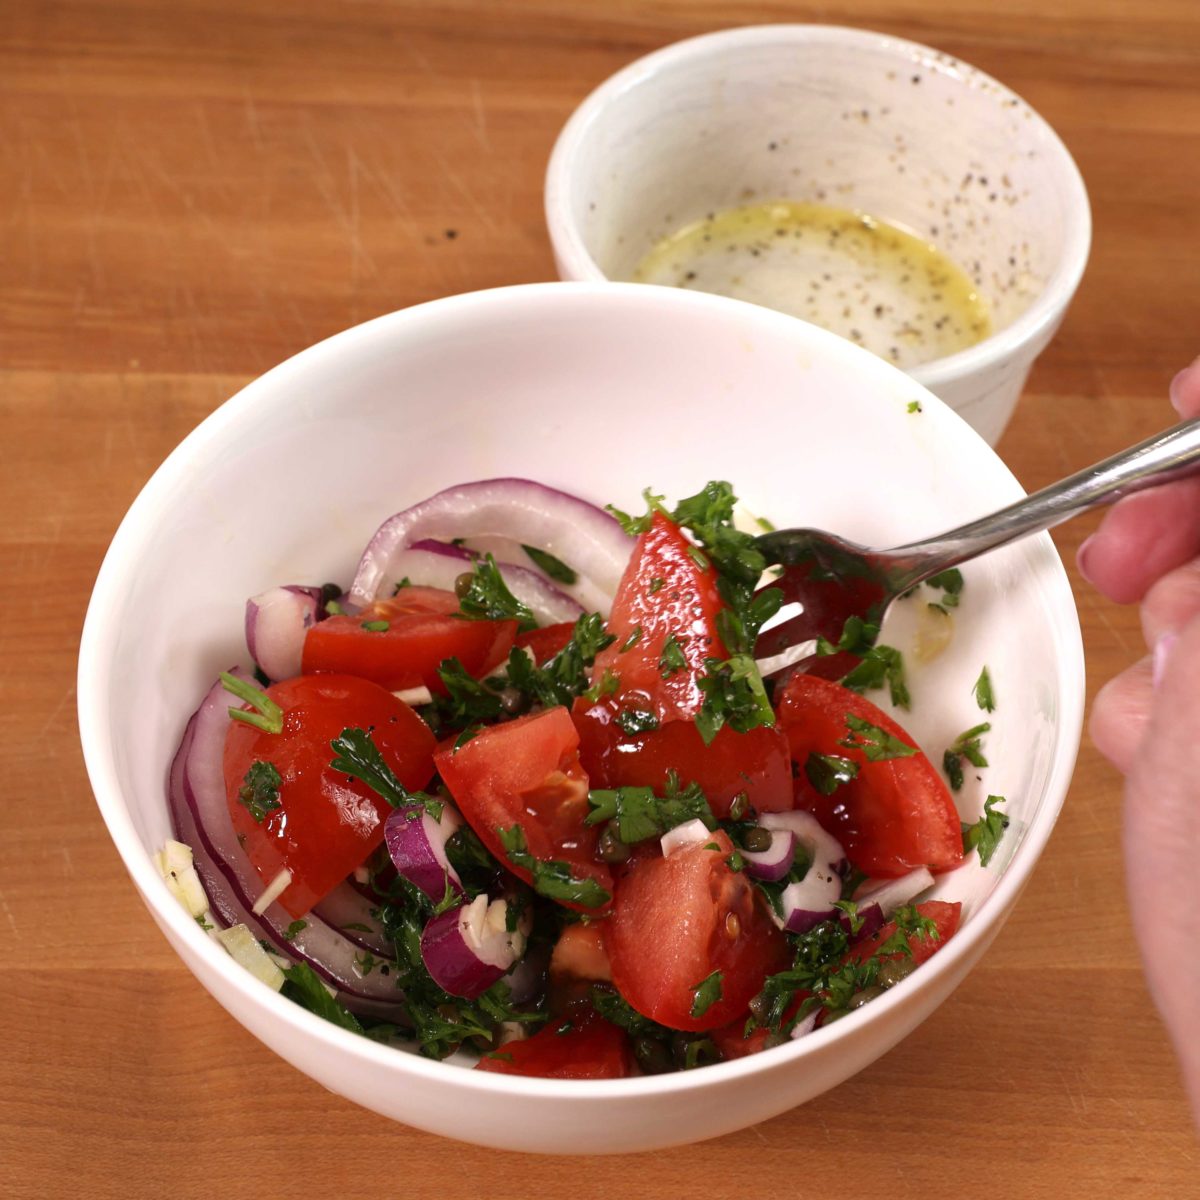 a white bowl filled with a tomato salad and a fork on the side of the bowl. In the background is an empty white bowl with a few drops of remaining dressing inside.